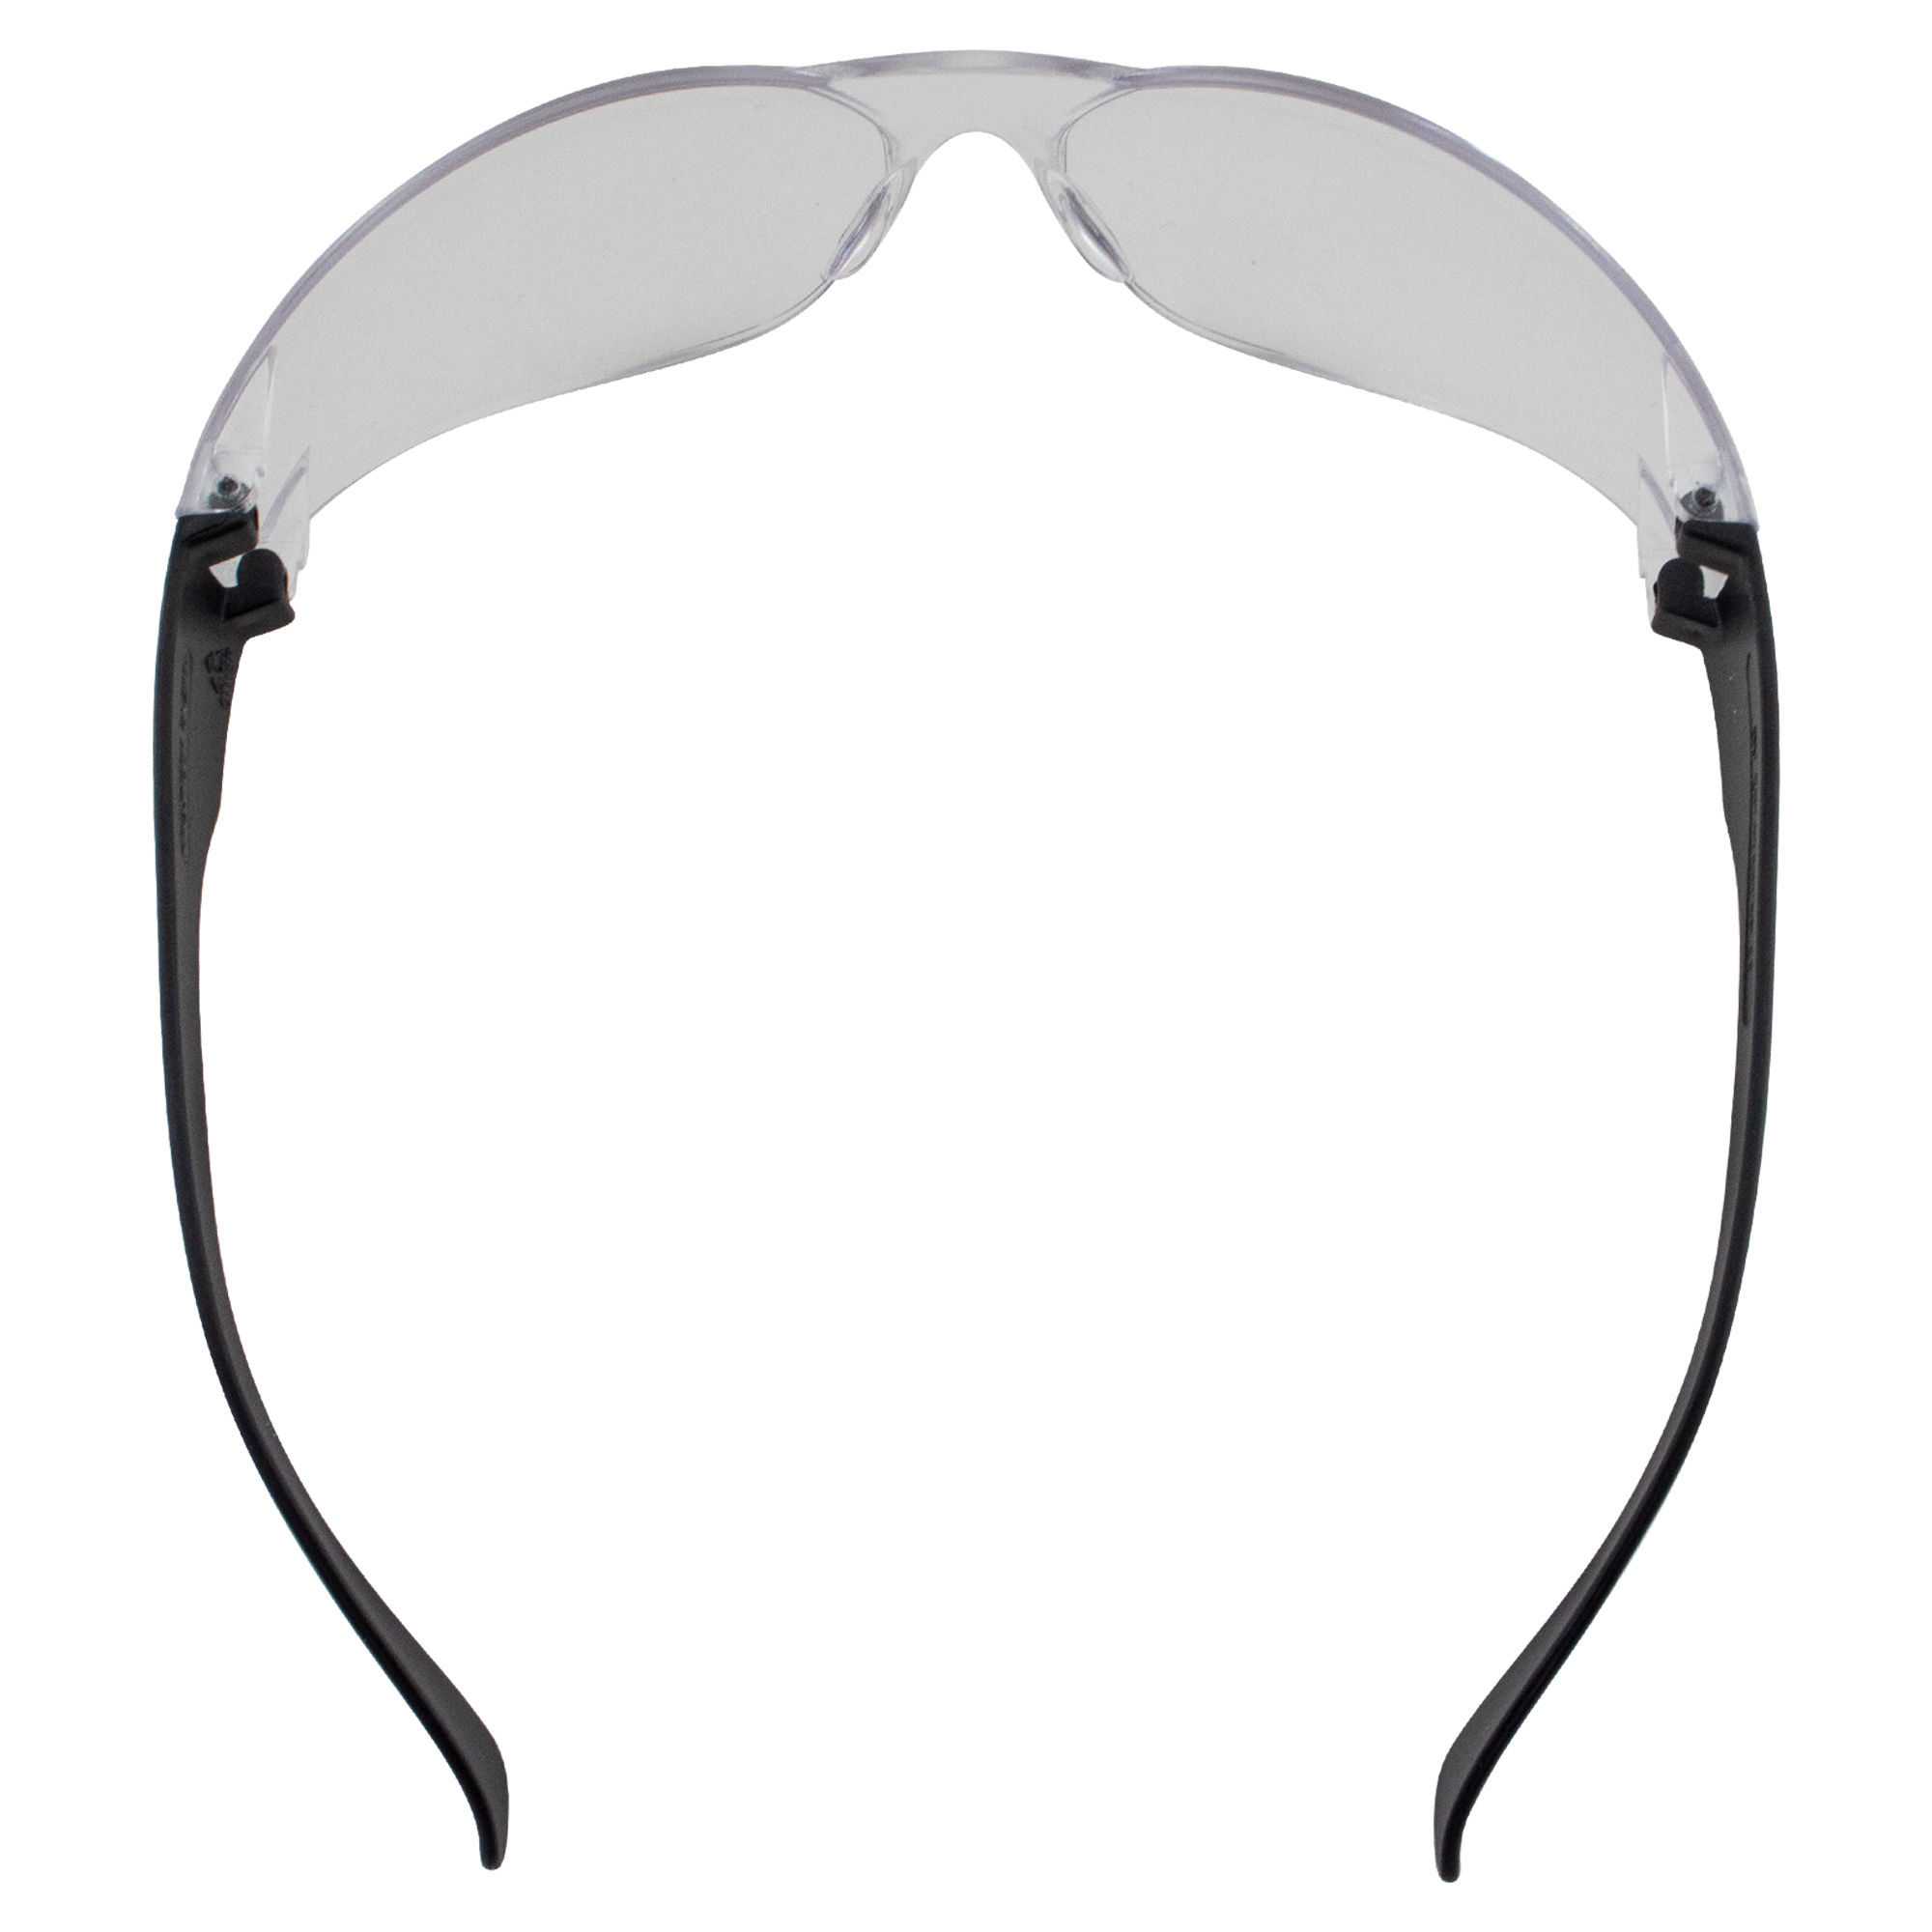 Two Pairs of Global Vision Rider Safety Motorcycle Riding Sunglasses Black Frames One Pair Clear Lens and One Pair Driving Mirror Lens with Microfiber Bags ANSI Z87.1 - image 4 of 9